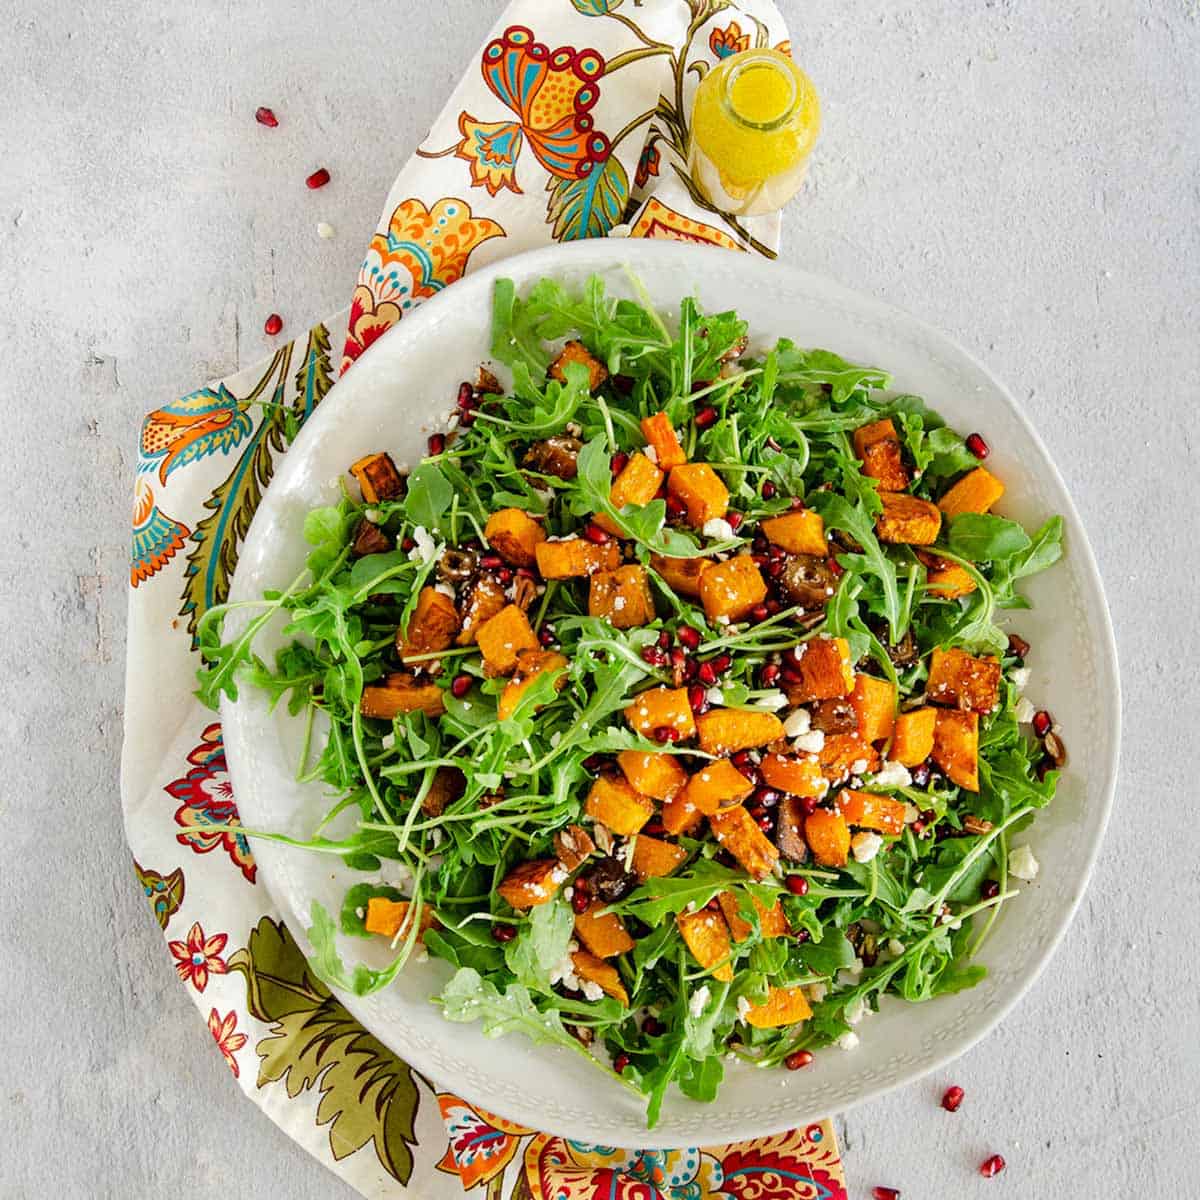 A bowl of arugula and roasted butternut squash salad with orange dressing.